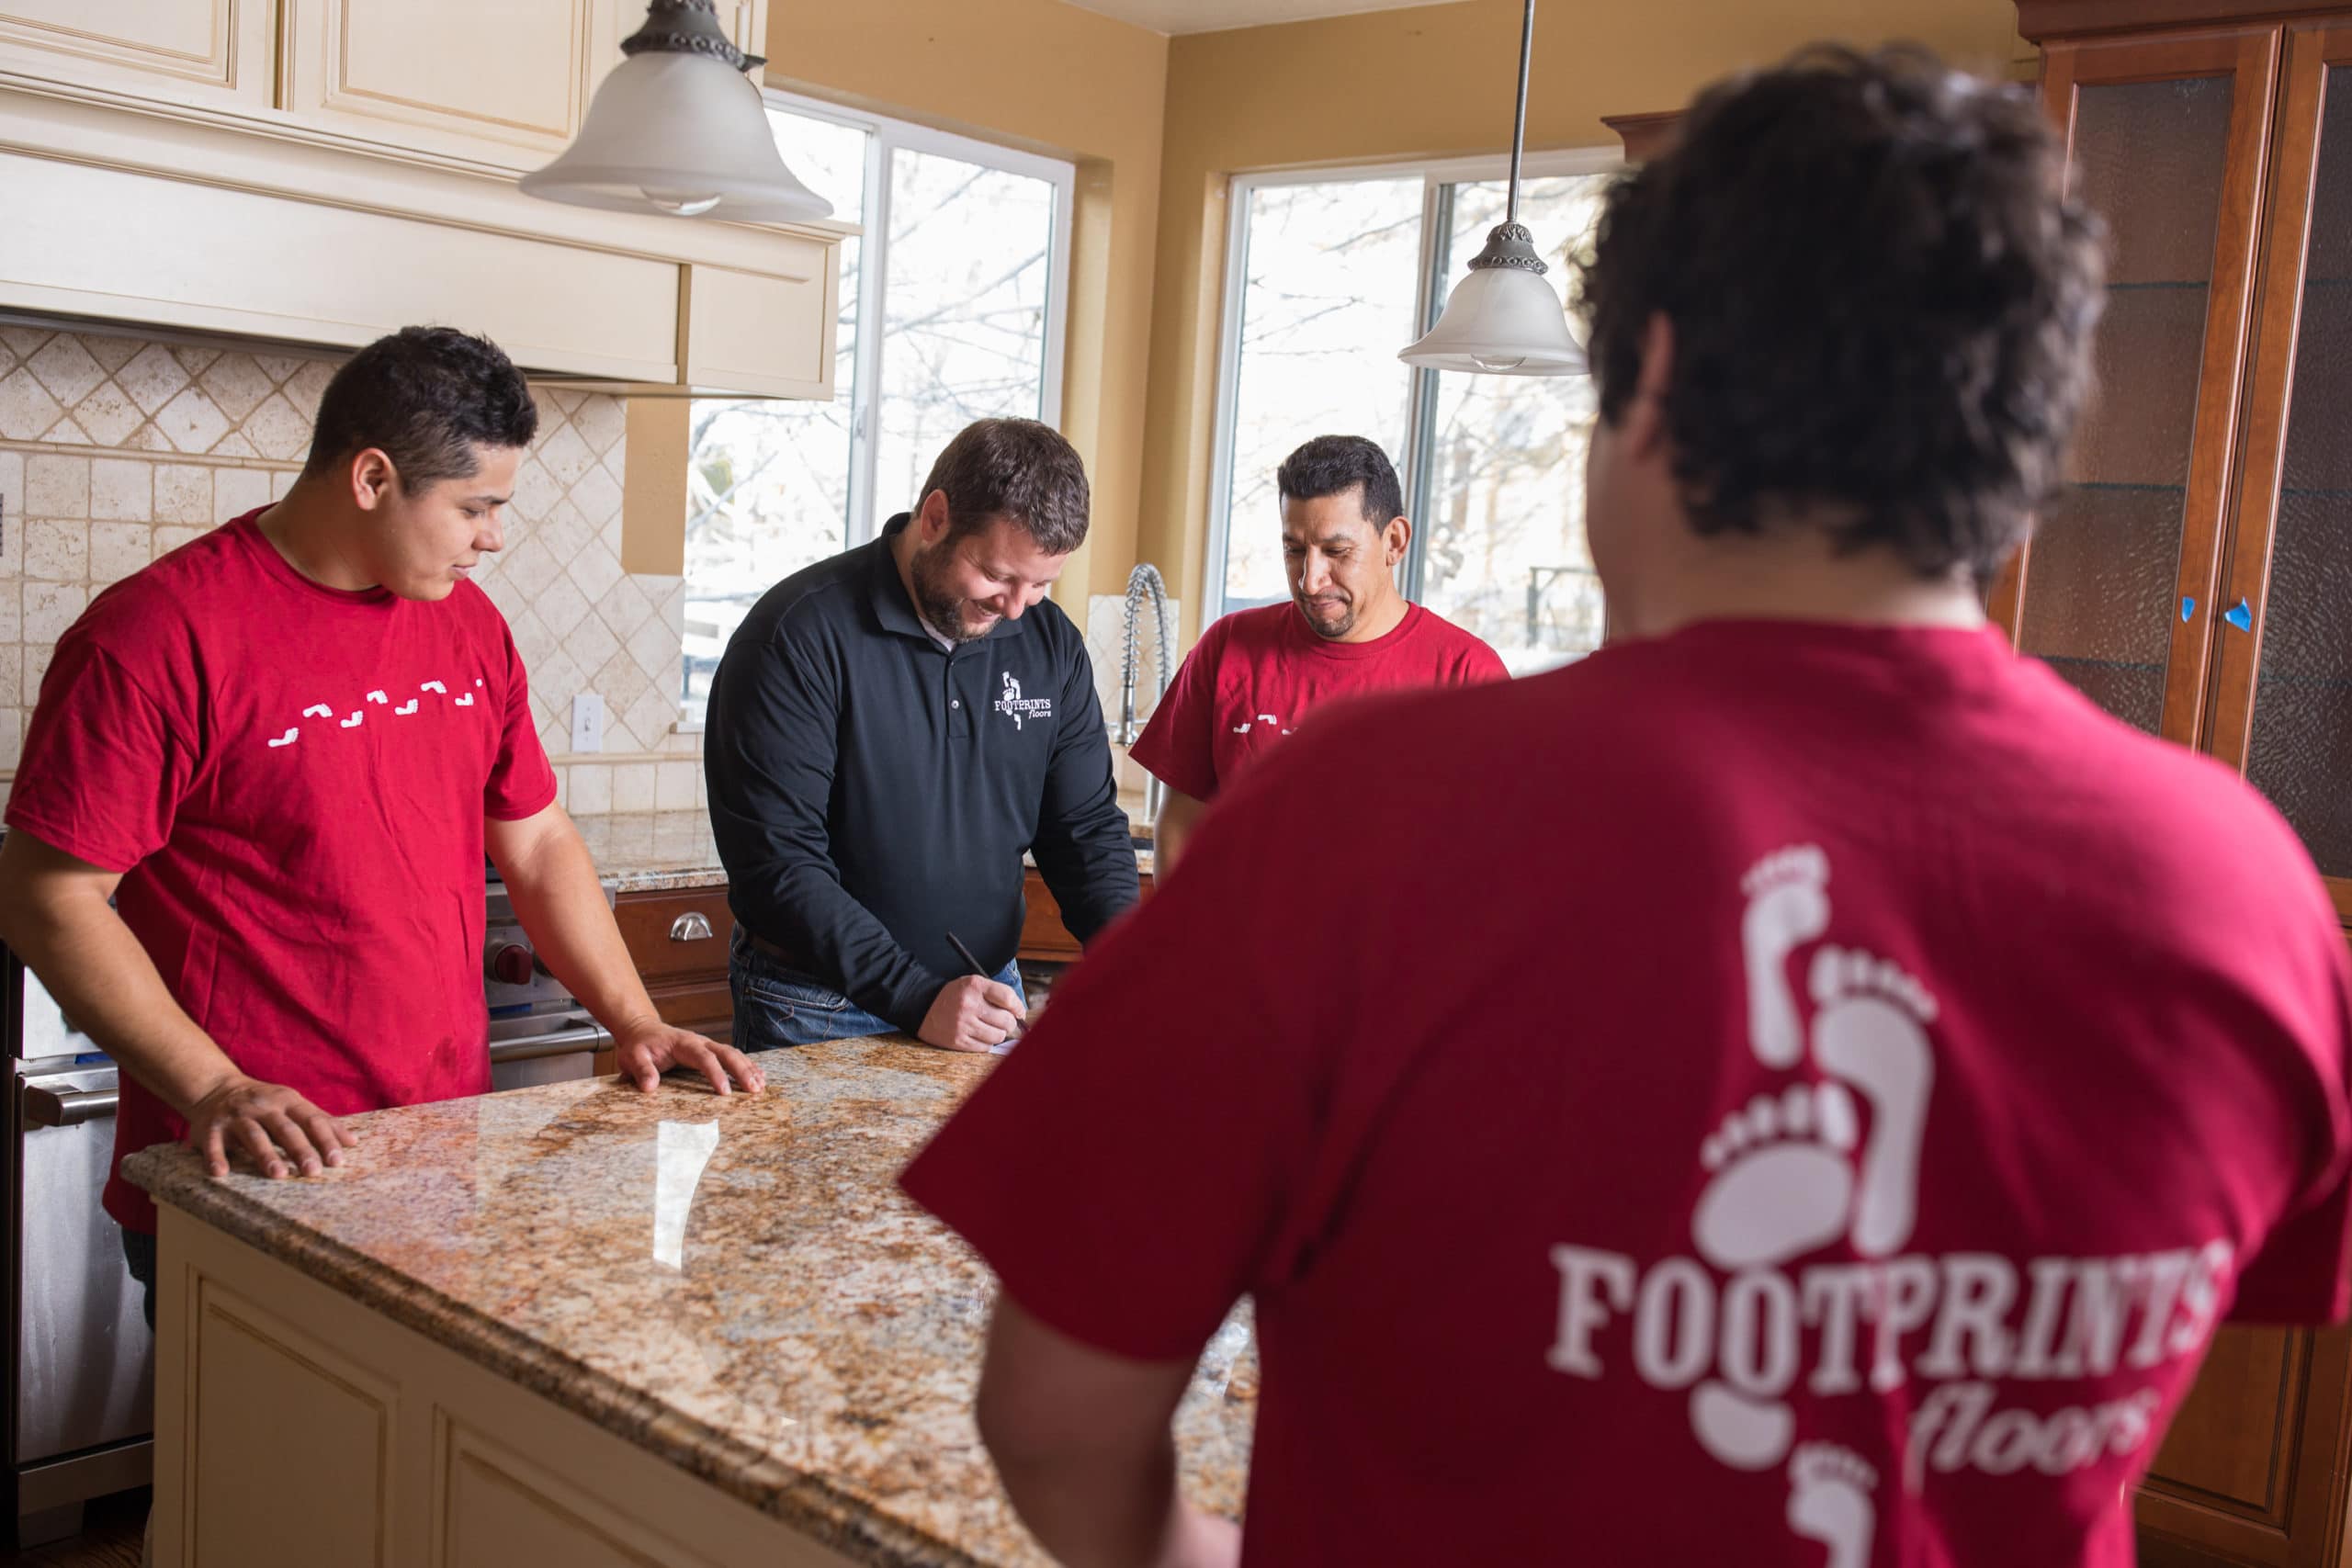 Experience the benefits of franchising and pursue a career you love with Footprints Floors.